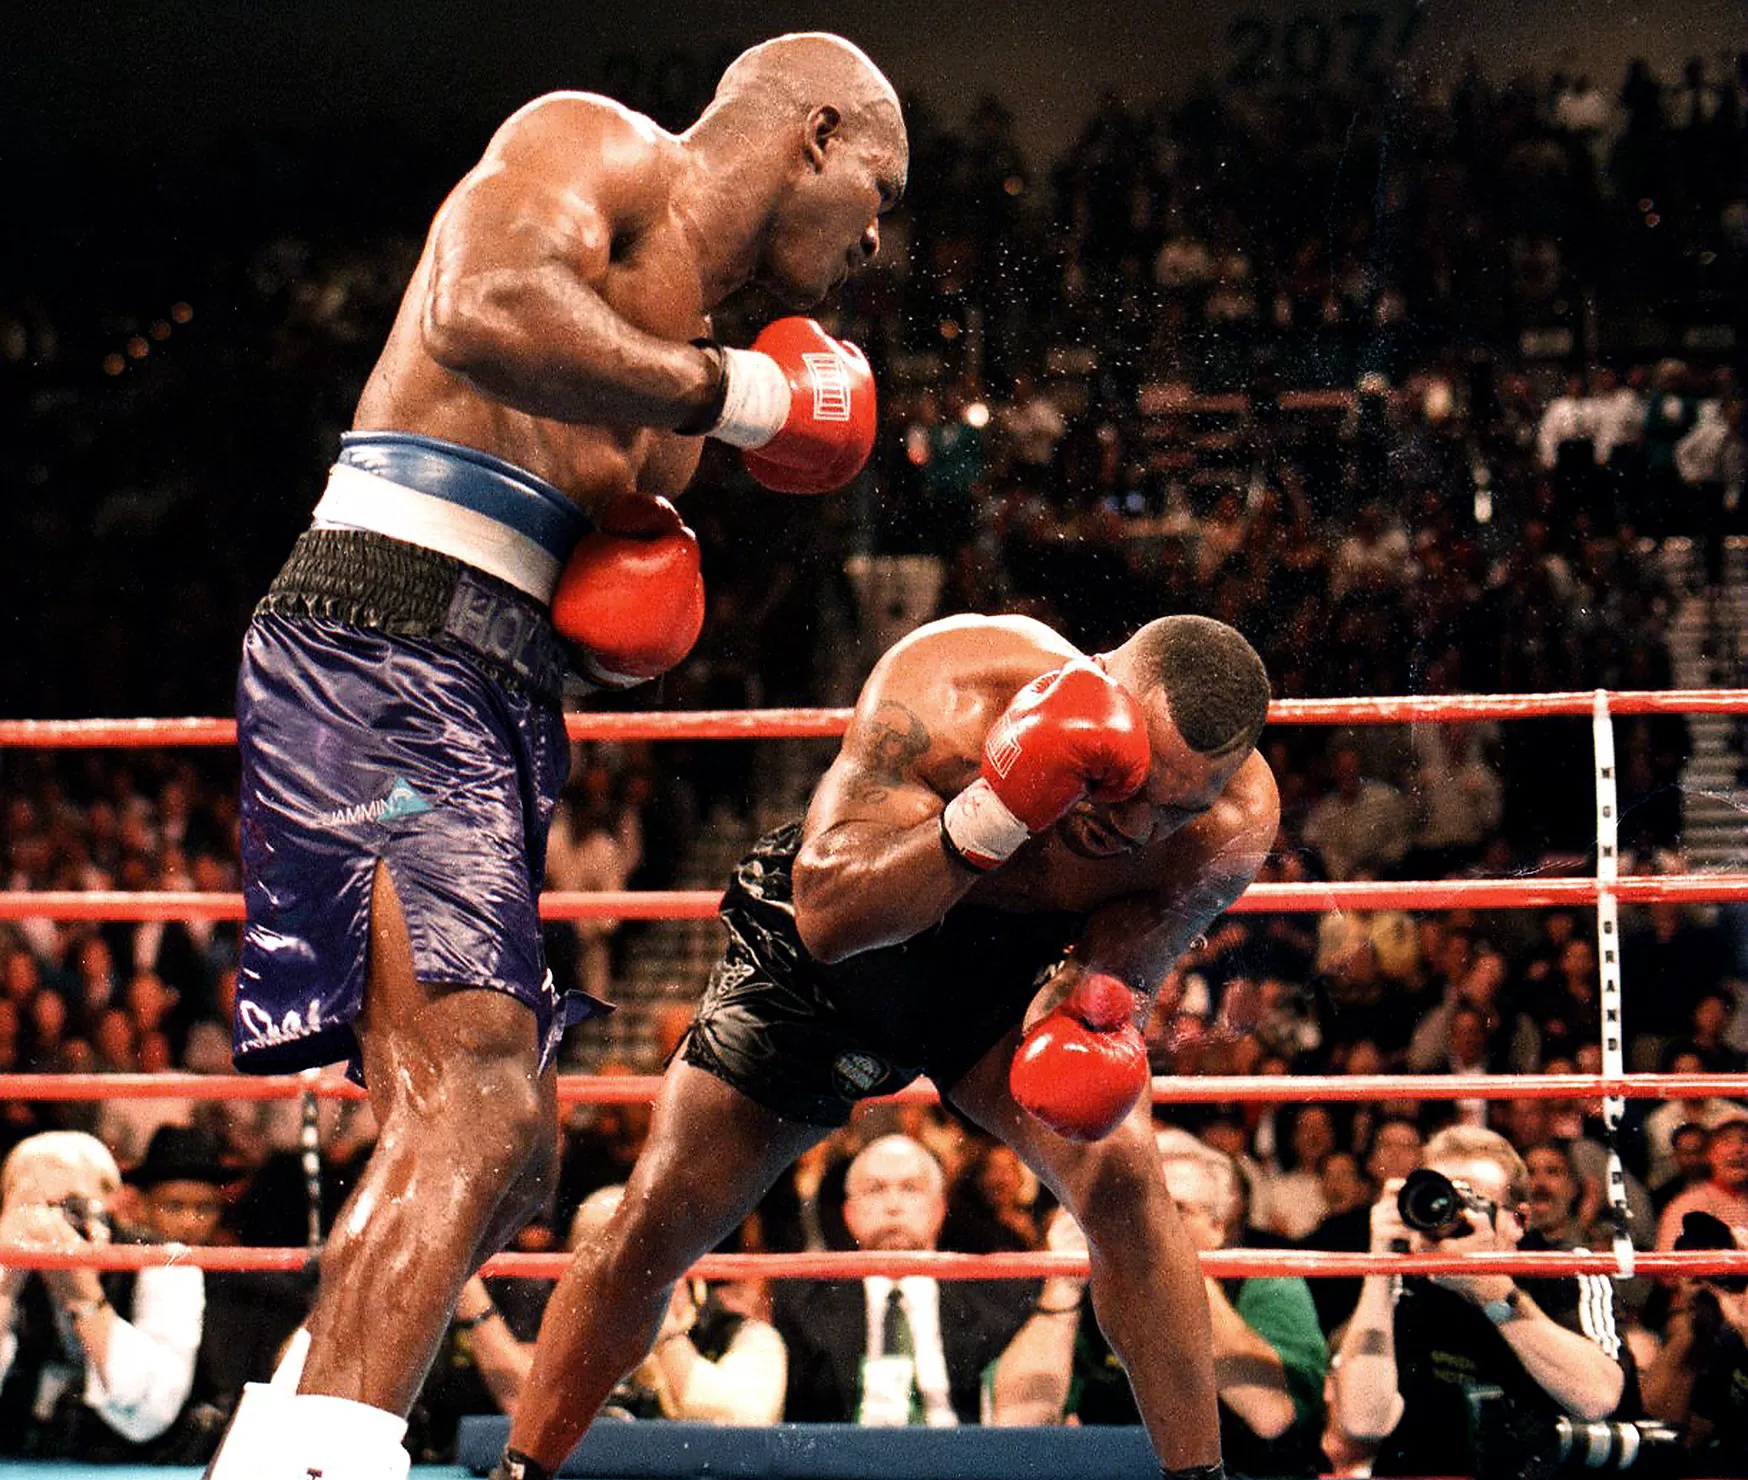 Holyfield vs Tyson I: "The Real Deal" Humbles "Iron Mike"